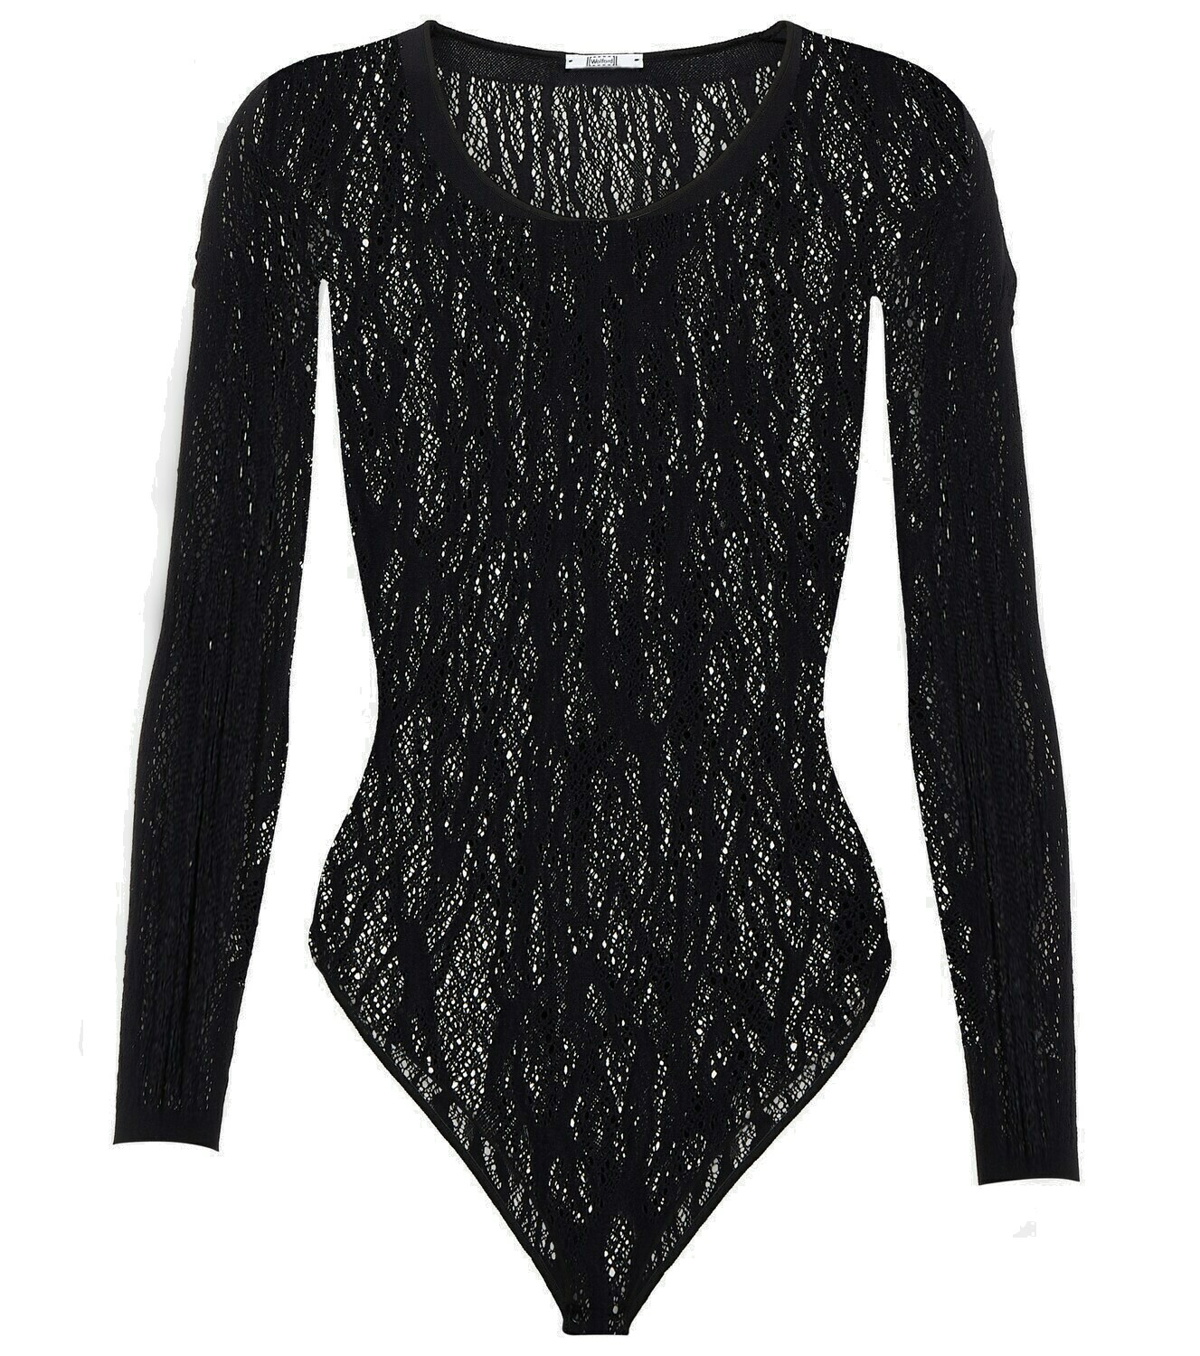 Luxury brands, Wolford Snake Lace String bodysuit